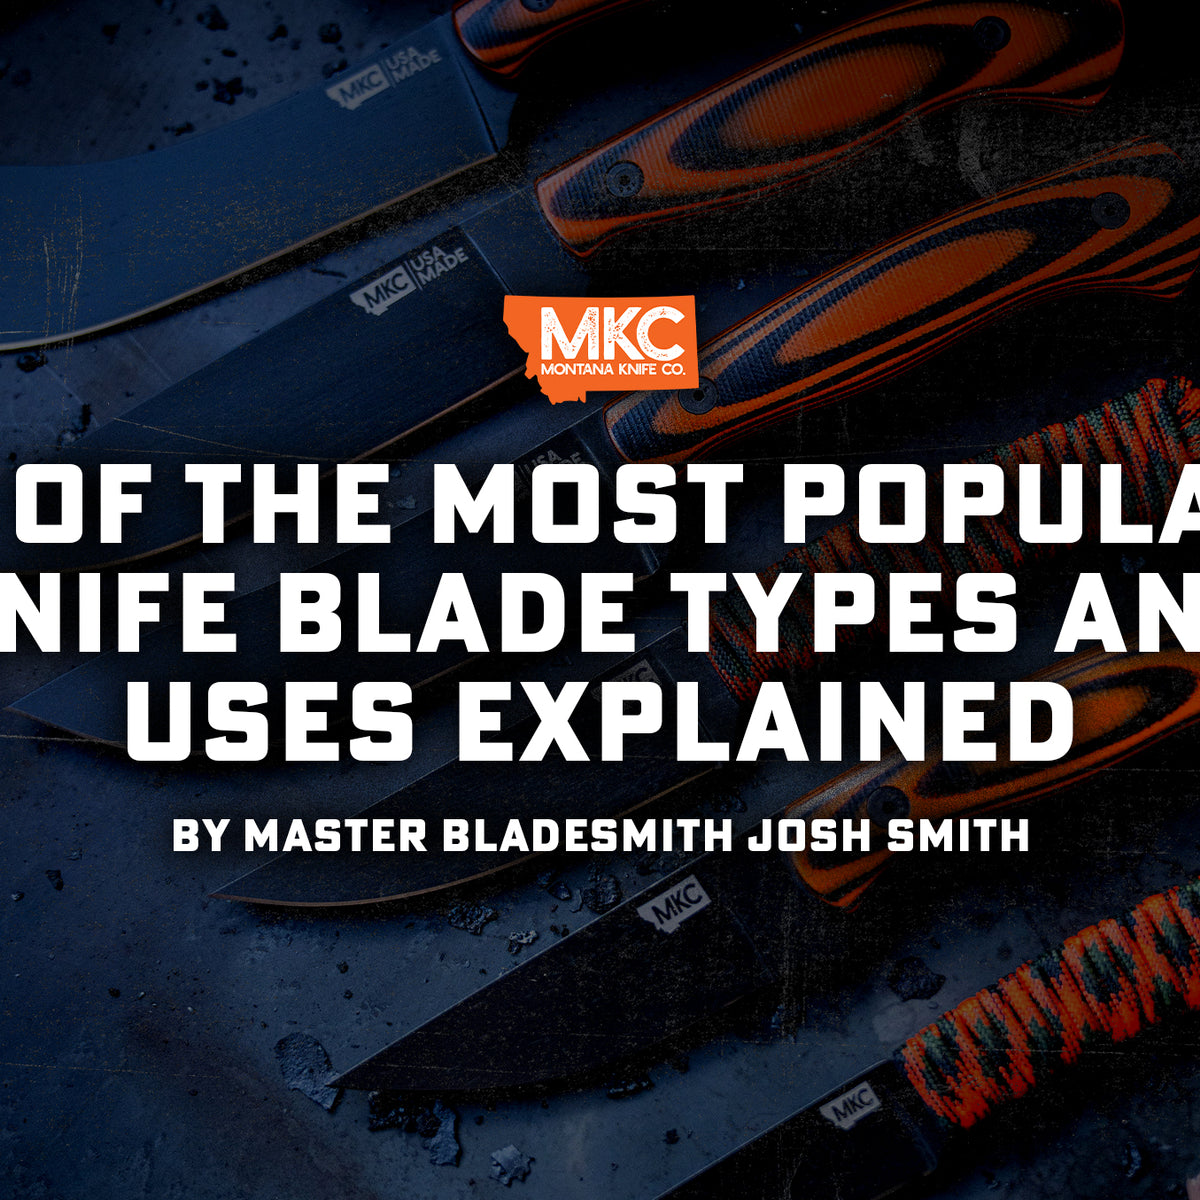 Knife descriptions and codes with statistics from the blade